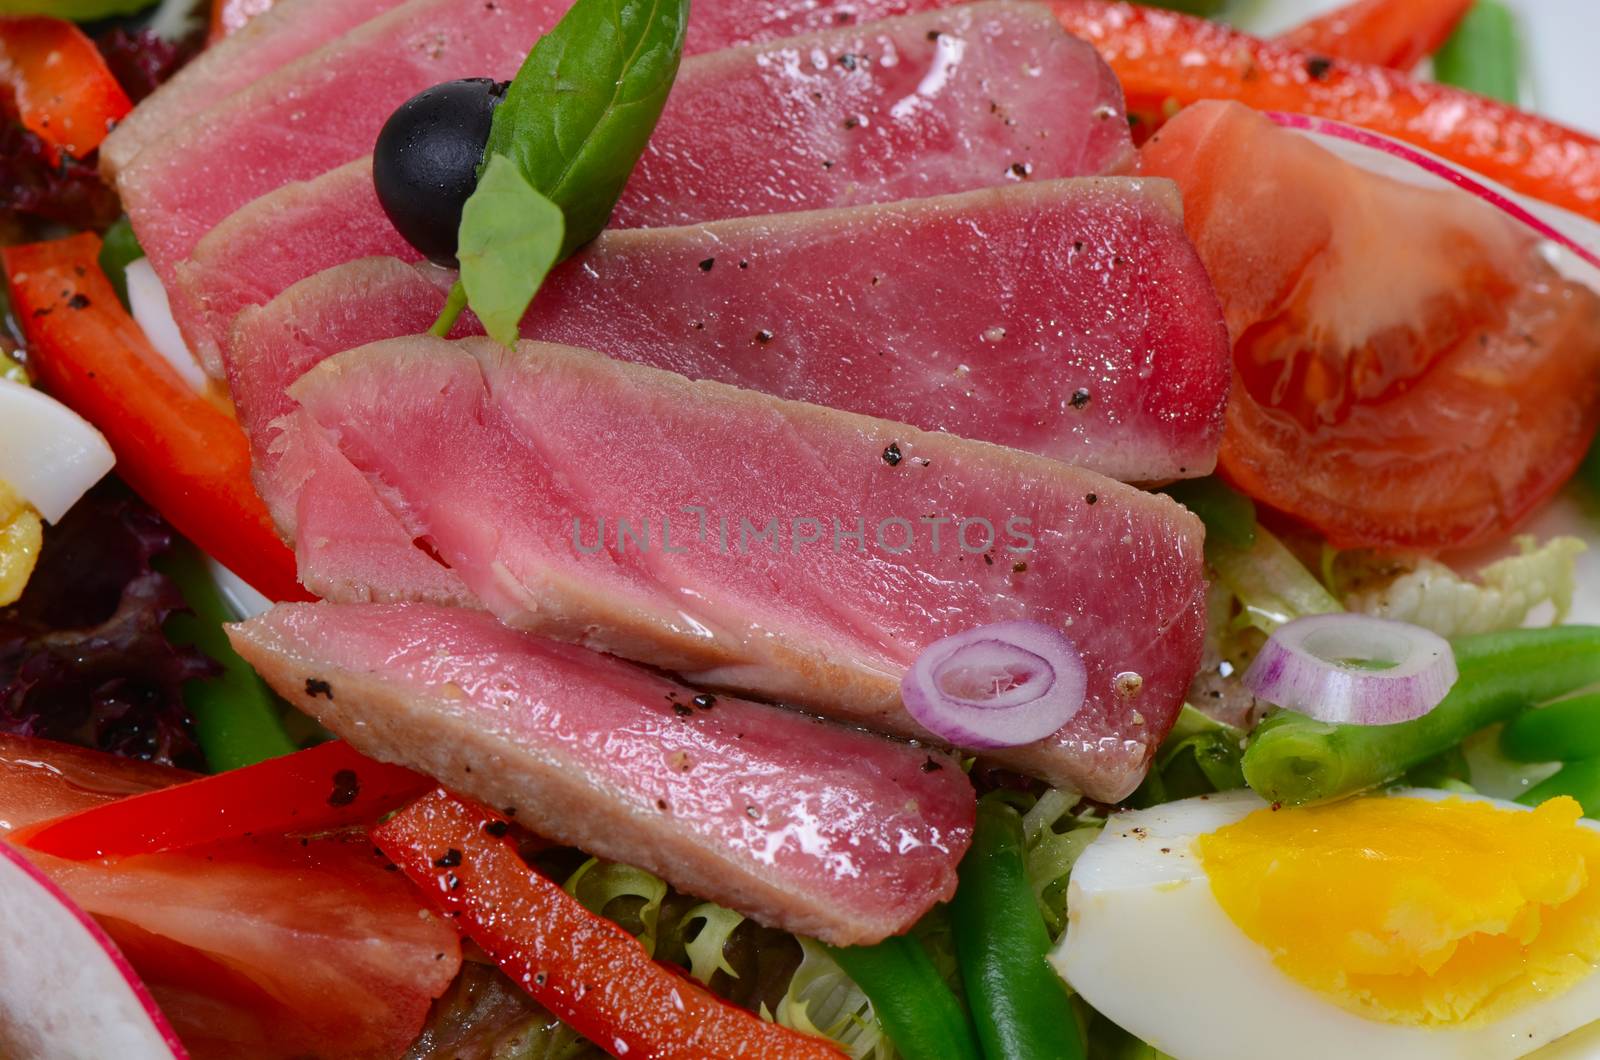 The nicoise with fresh tuna and vegetables